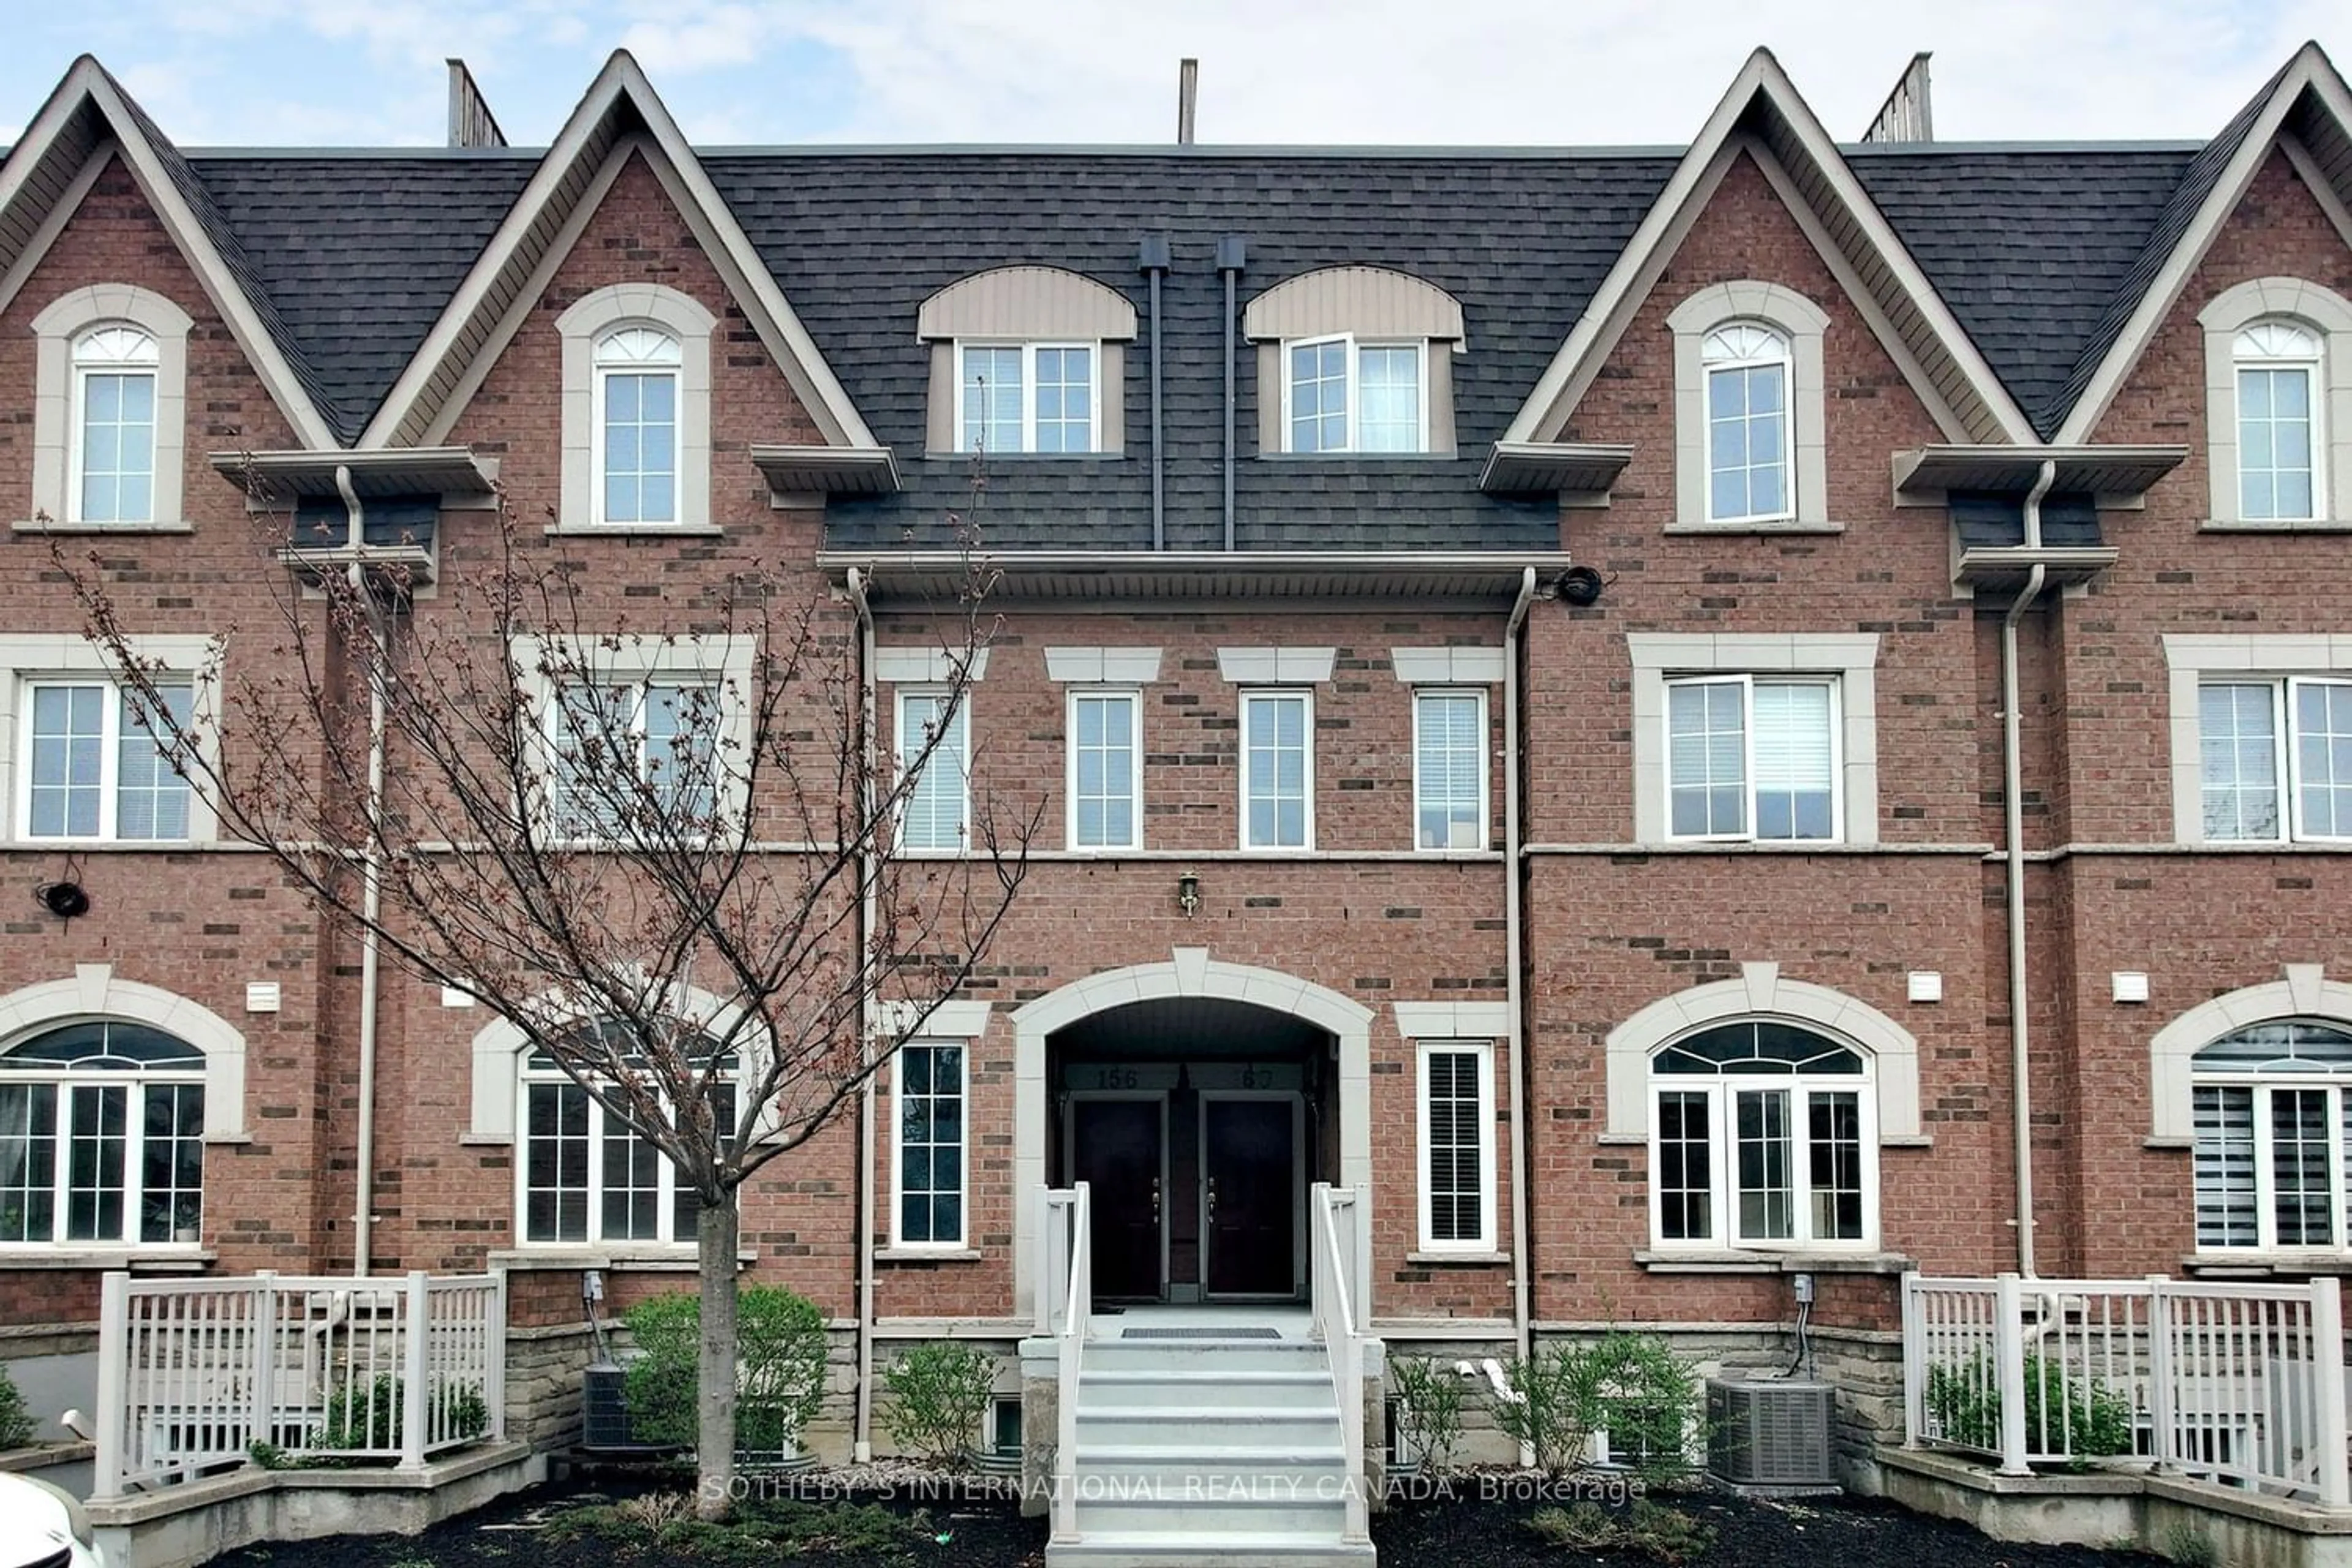 Home with brick exterior material for 601 Shoreline Dr #155, Mississauga Ontario L5B 4K1